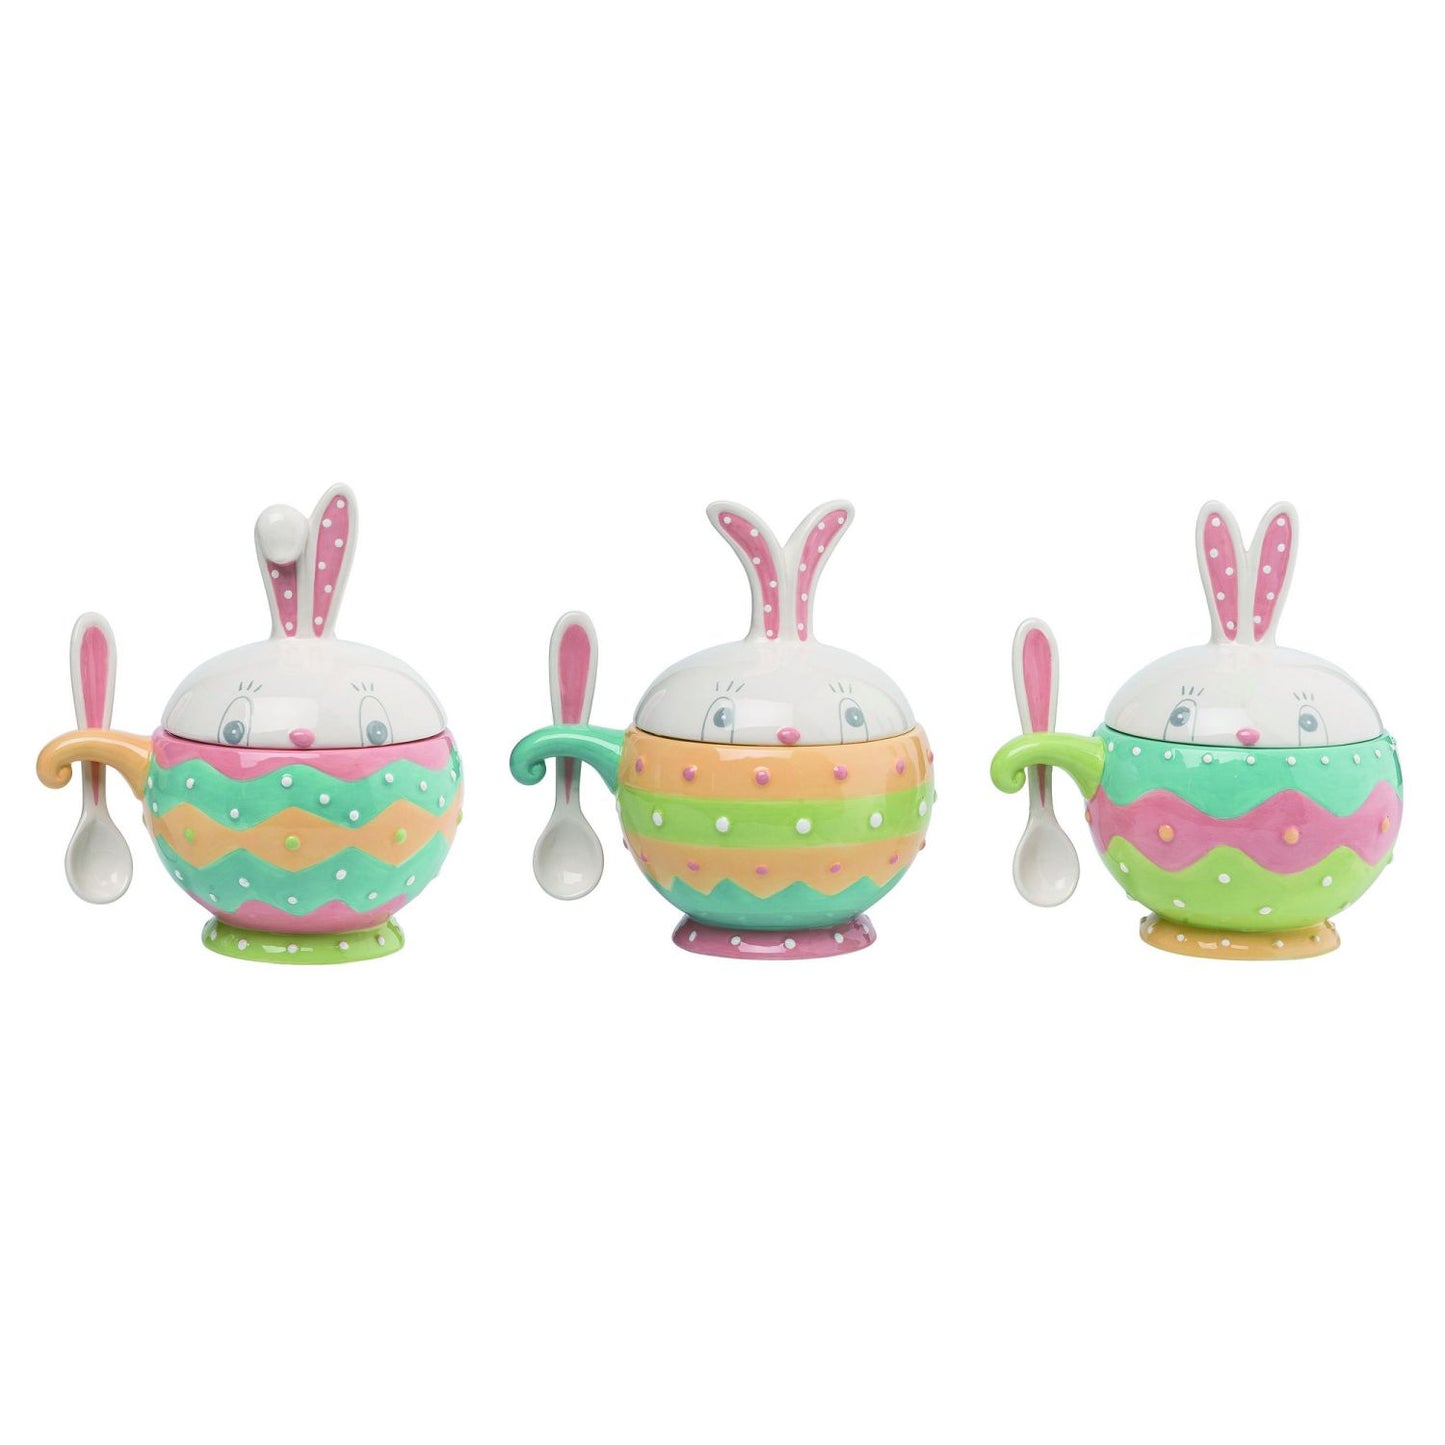 Transpac Dolomite Easter Dottie Bowl With Spoon & Lid, Set Of 3, Assortment